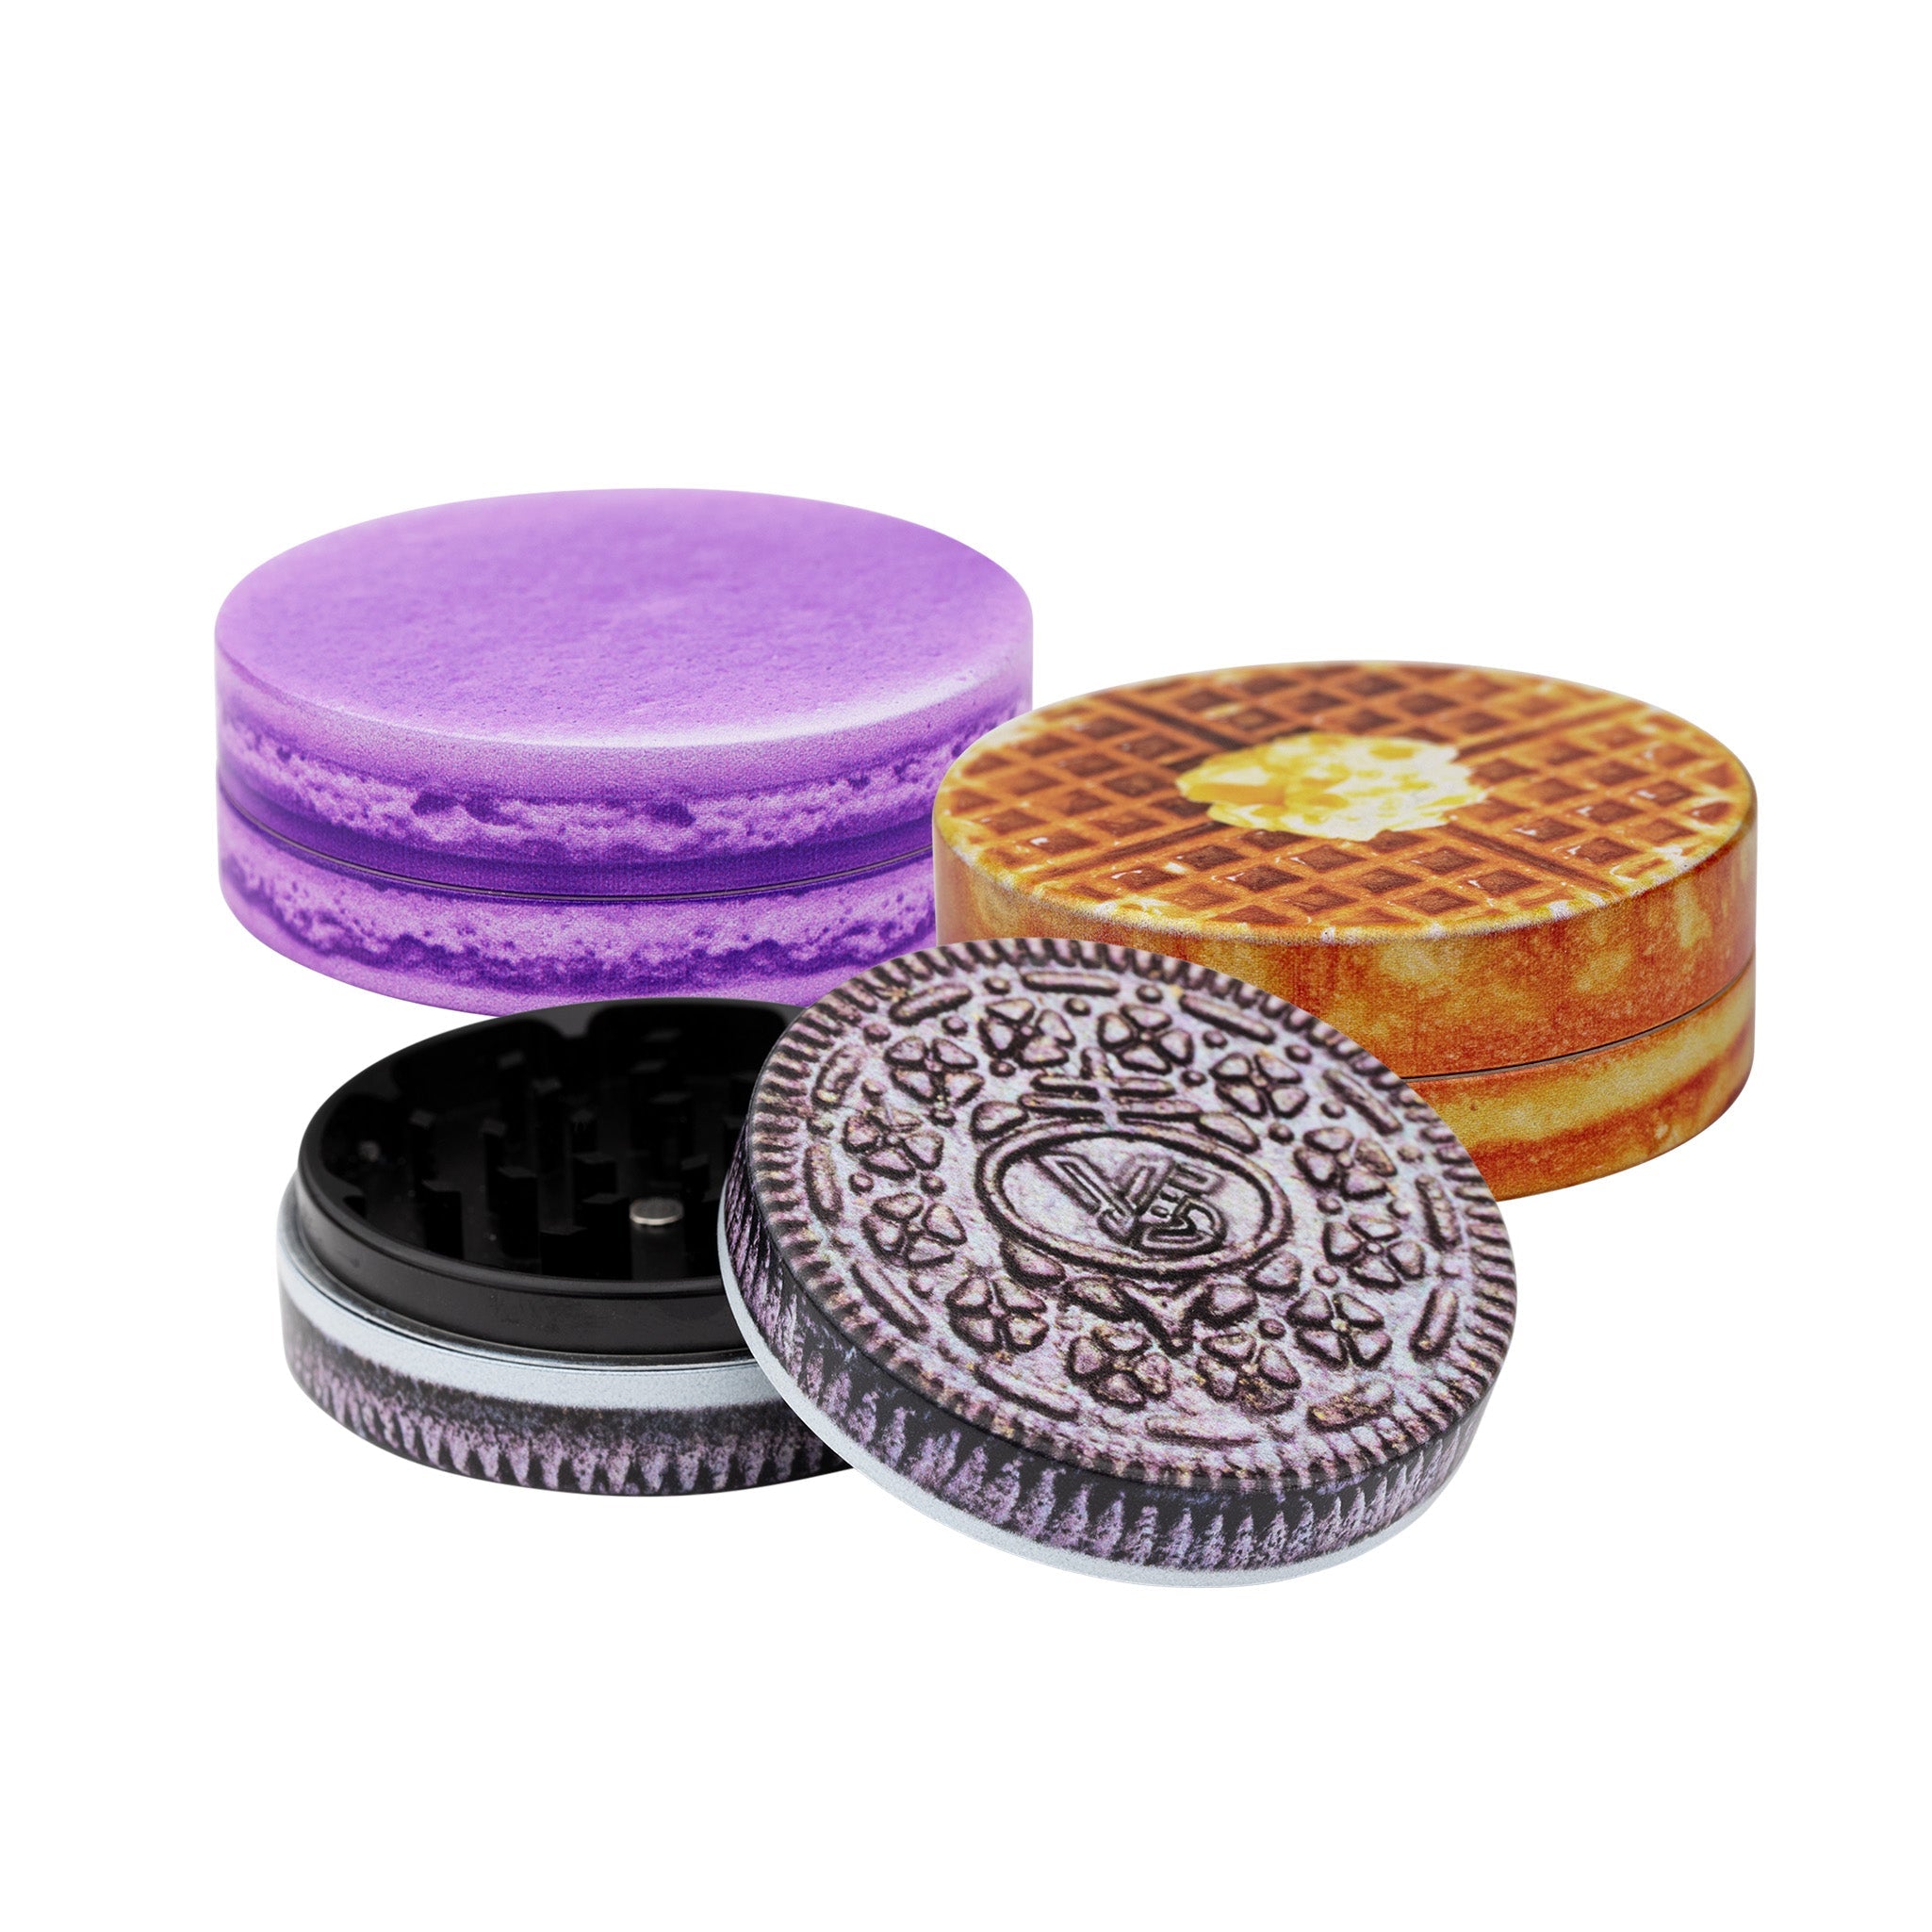 V Syndicate SharpShred 2-Piece Dine-In Grinder Cookie Waffle Macaron